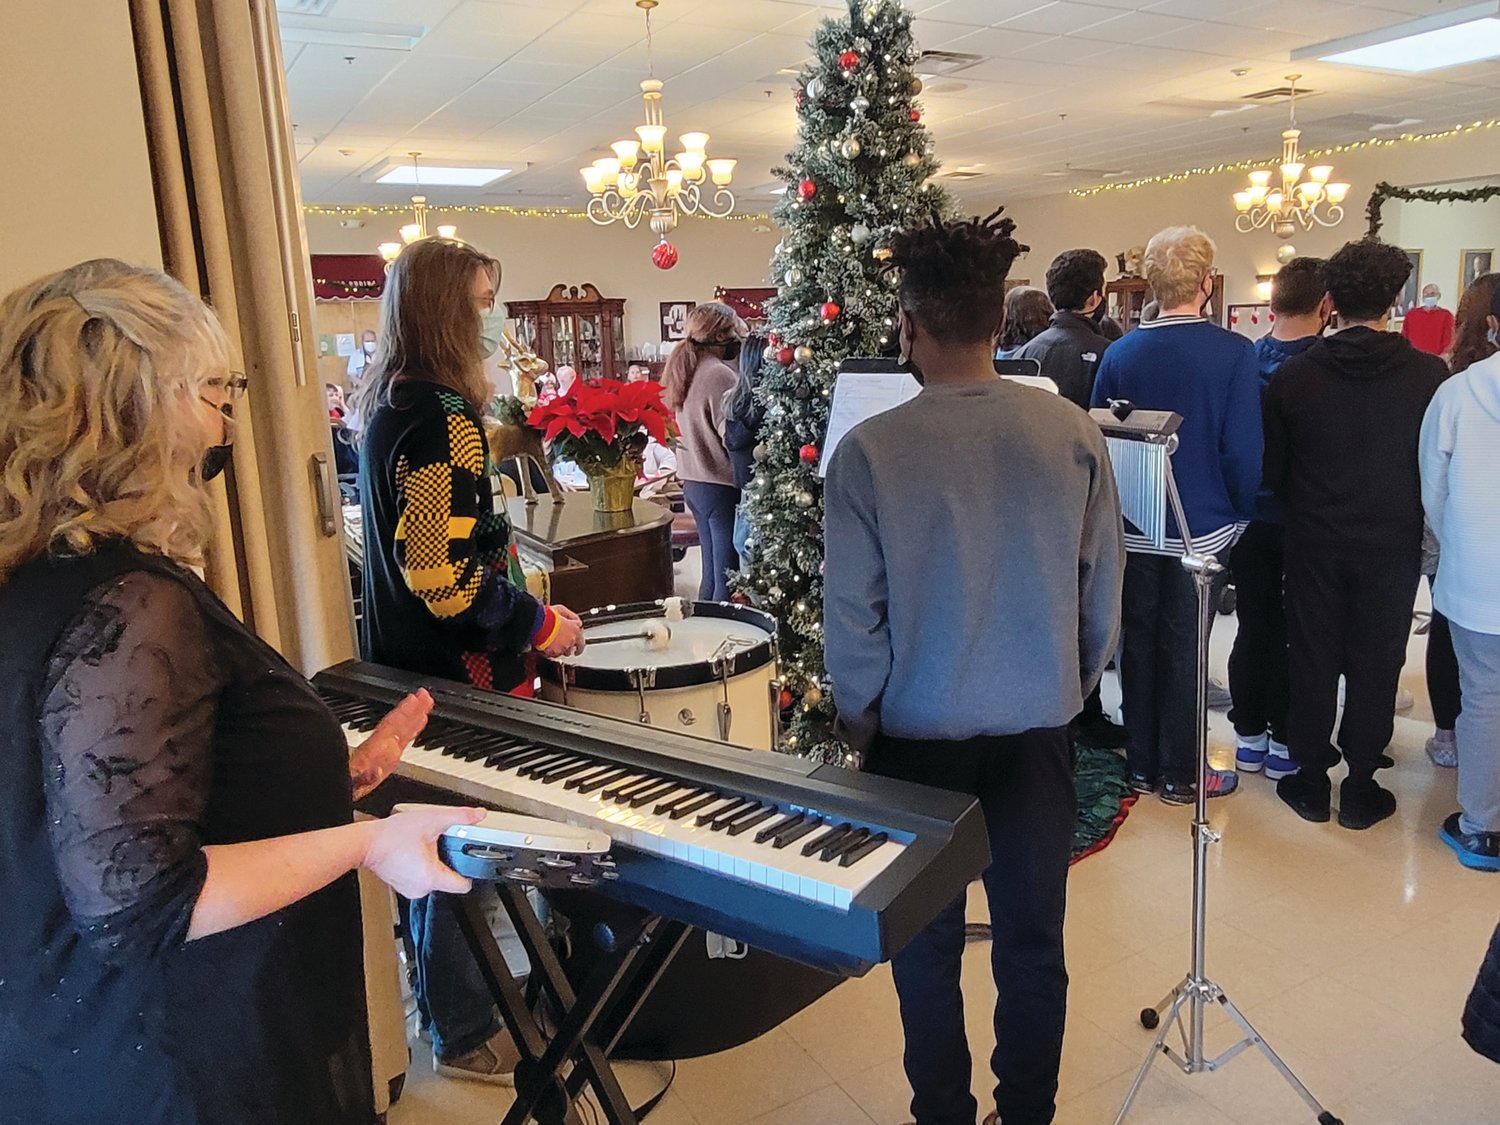 CHRISTMAS PARTY: Members of the Johnston Senior Center had drinks and snacks prior to a rousing performance by the Johnston High School Chorus.